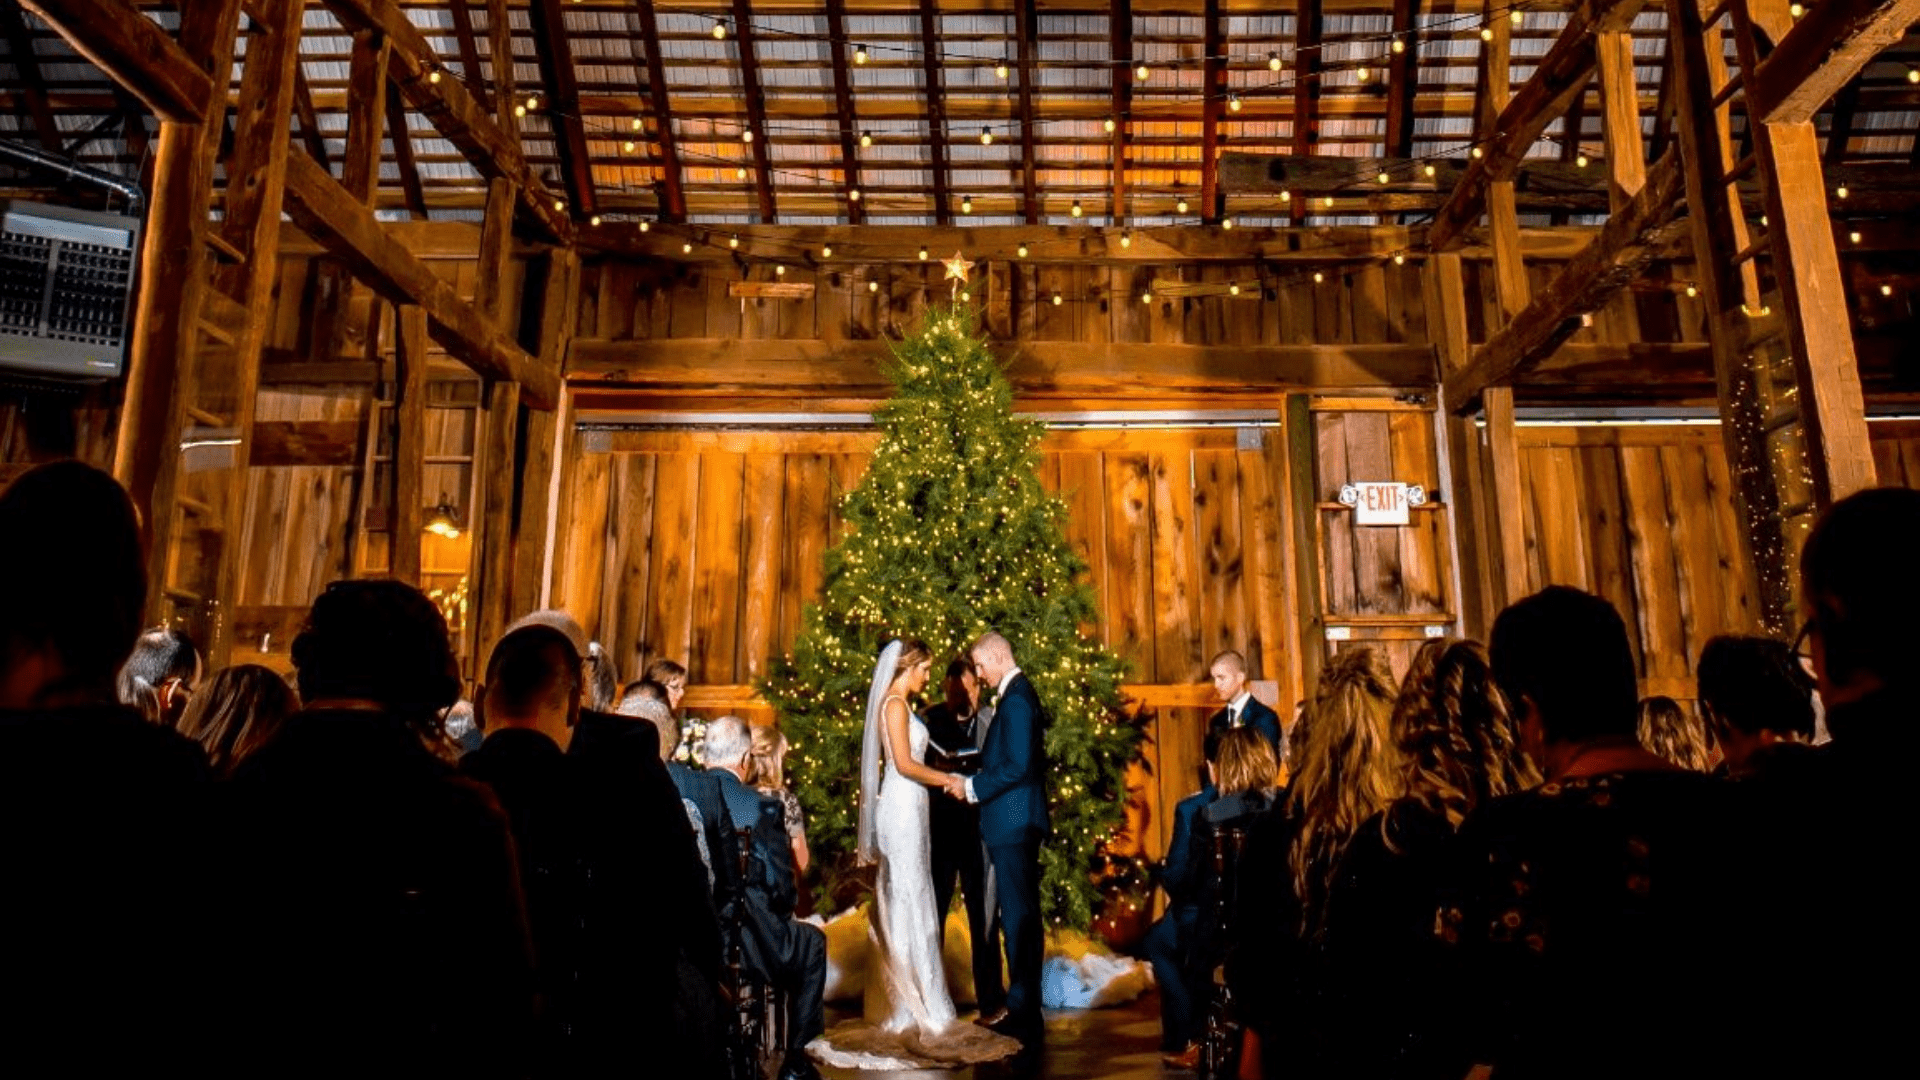 Couple at an altar with a christmas tree in rustic barn wedding venue